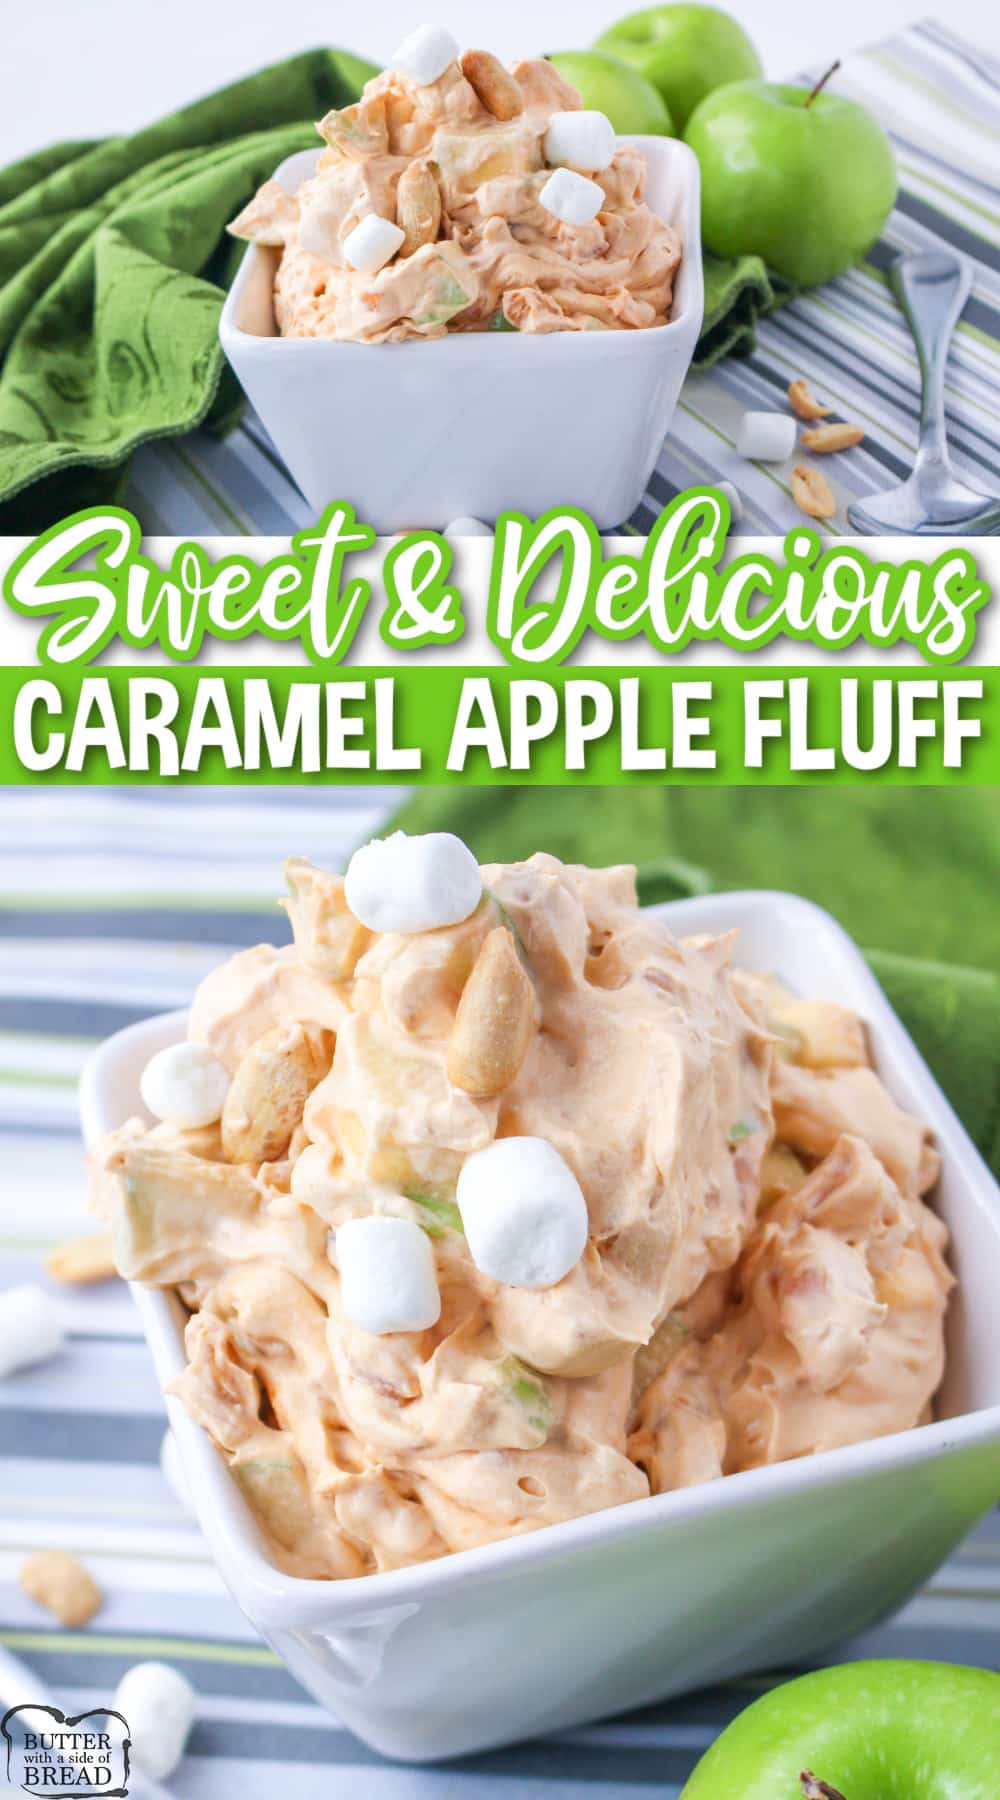 Caramel Apple Fluff made in minutes with only 6 ingredients. Simple fluff recipe that tastes like caramel apples!